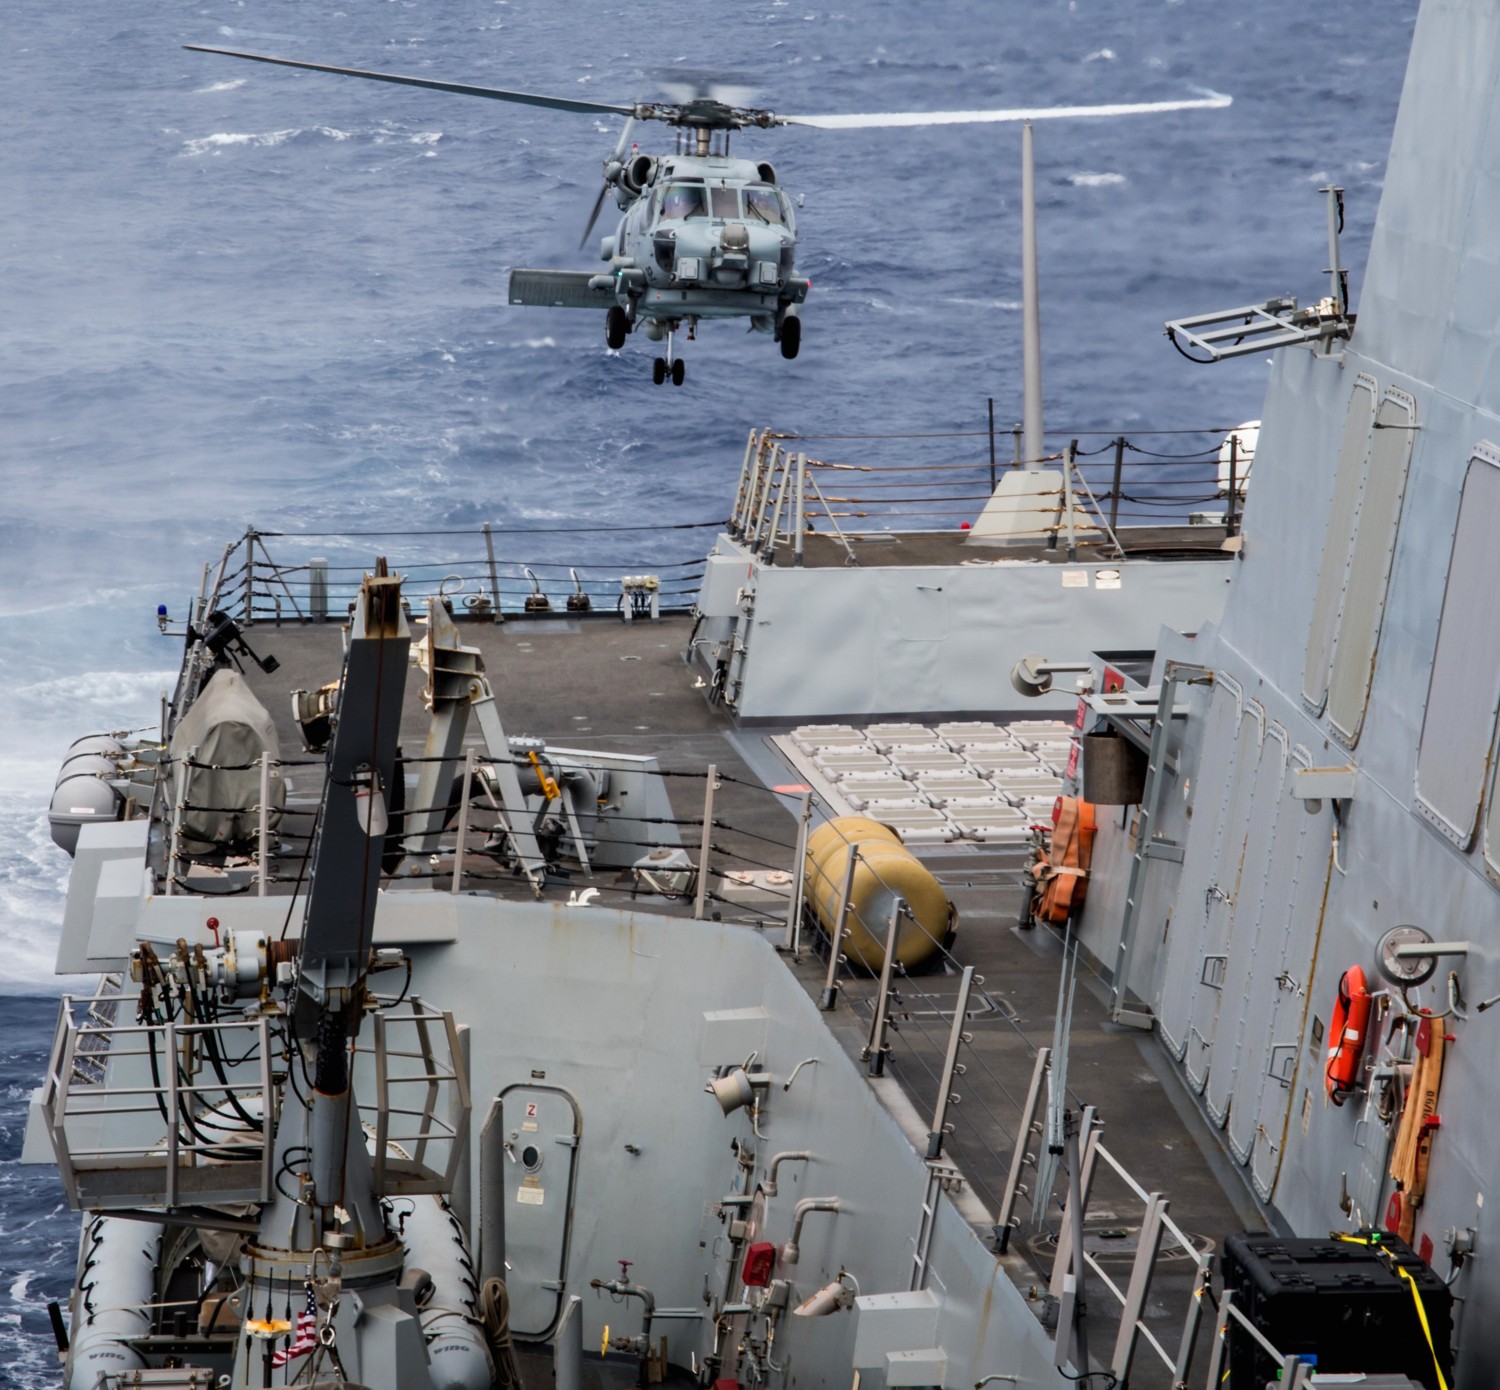 ddg-110 uss dewey arleigh burke class guided missile destroyer aegis us navy helicopter operations 96